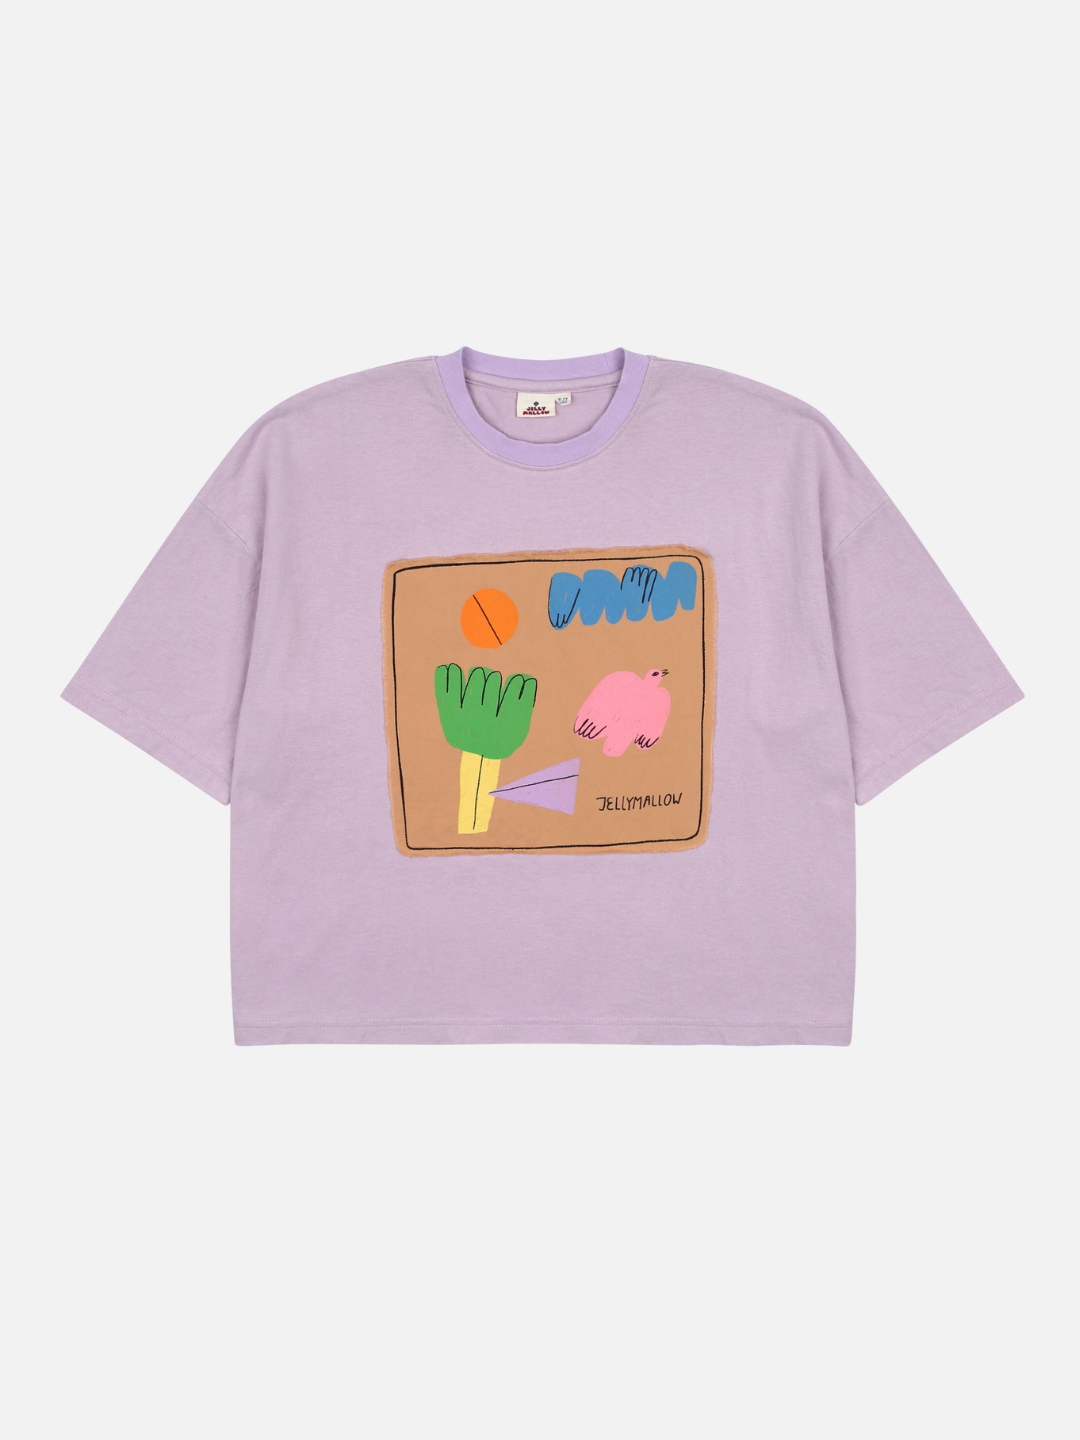 Front of Frame T-Shirt. Brown rectangle with colorful shapes within its borders against a light purple background.